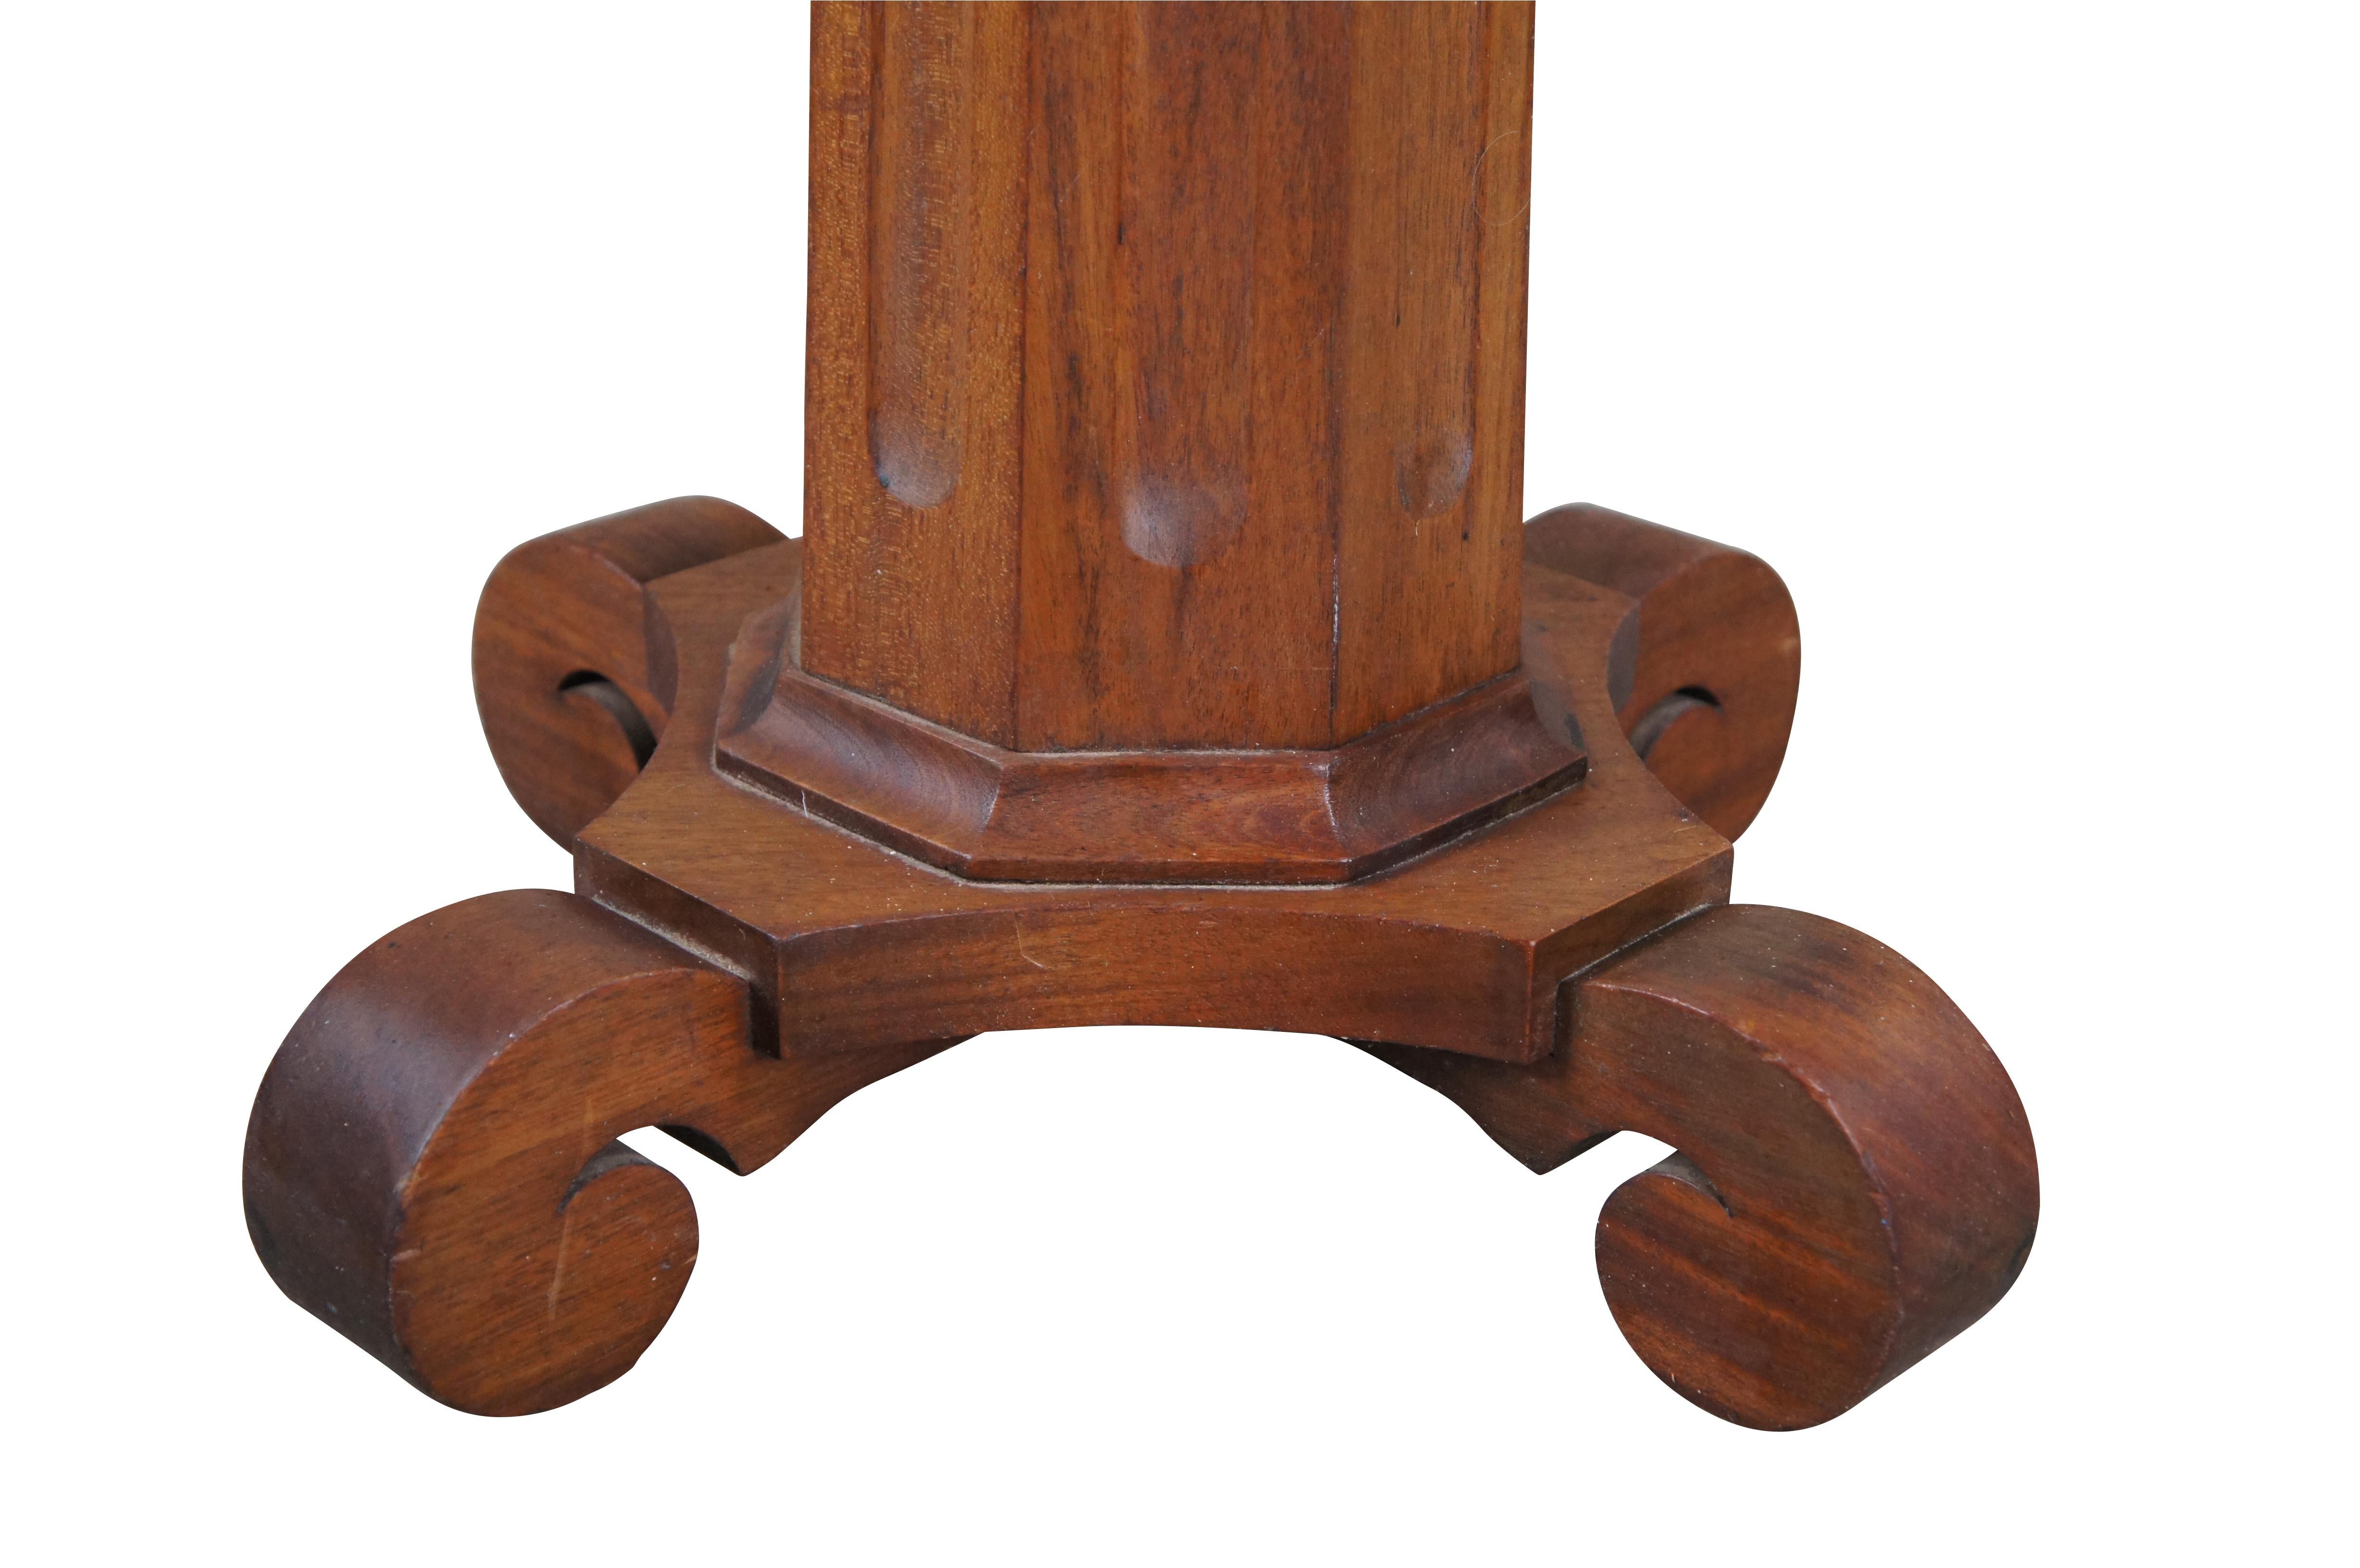 American Empire Antique American Classical Empire Mahogany Pedestal Table Sculpture Plant Stand For Sale